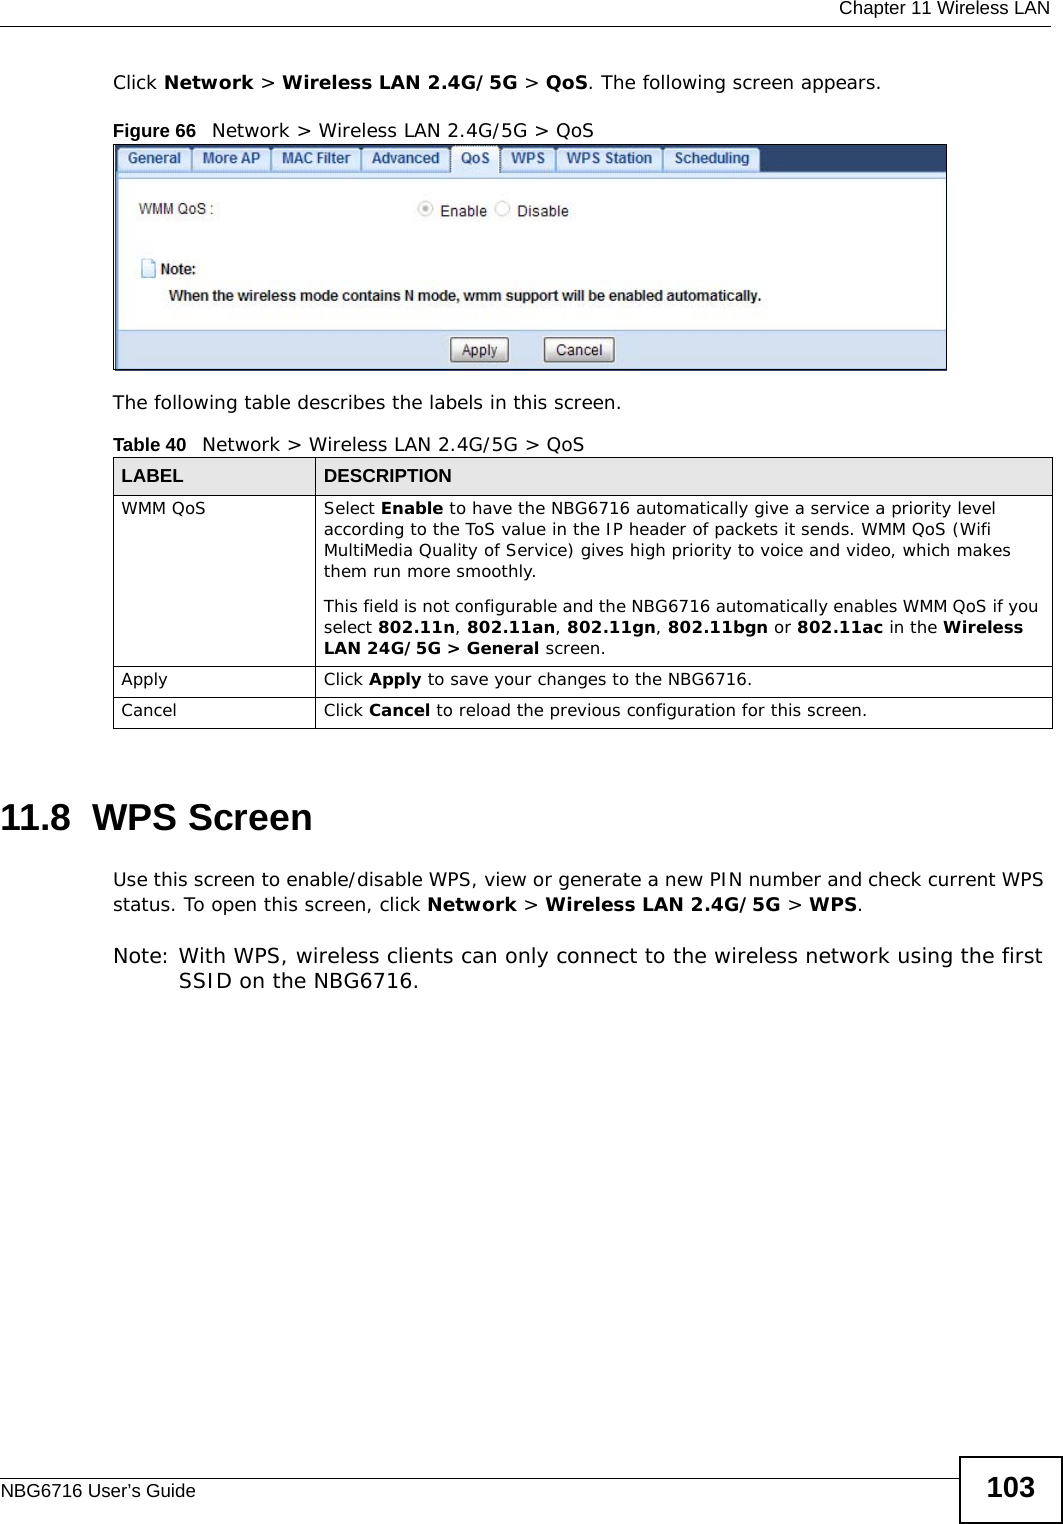  Chapter 11 Wireless LANNBG6716 User’s Guide 103Click Network &gt; Wireless LAN 2.4G/5G &gt; QoS. The following screen appears.Figure 66   Network &gt; Wireless LAN 2.4G/5G &gt; QoS The following table describes the labels in this screen. 11.8  WPS ScreenUse this screen to enable/disable WPS, view or generate a new PIN number and check current WPS status. To open this screen, click Network &gt; Wireless LAN 2.4G/5G &gt; WPS.Note: With WPS, wireless clients can only connect to the wireless network using the first SSID on the NBG6716.Table 40   Network &gt; Wireless LAN 2.4G/5G &gt; QoSLABEL DESCRIPTIONWMM QoS Select Enable to have the NBG6716 automatically give a service a priority level according to the ToS value in the IP header of packets it sends. WMM QoS (Wifi MultiMedia Quality of Service) gives high priority to voice and video, which makes them run more smoothly.This field is not configurable and the NBG6716 automatically enables WMM QoS if you select 802.11n, 802.11an, 802.11gn, 802.11bgn or 802.11ac in the Wireless LAN 24G/5G &gt; General screen.Apply Click Apply to save your changes to the NBG6716.Cancel Click Cancel to reload the previous configuration for this screen.